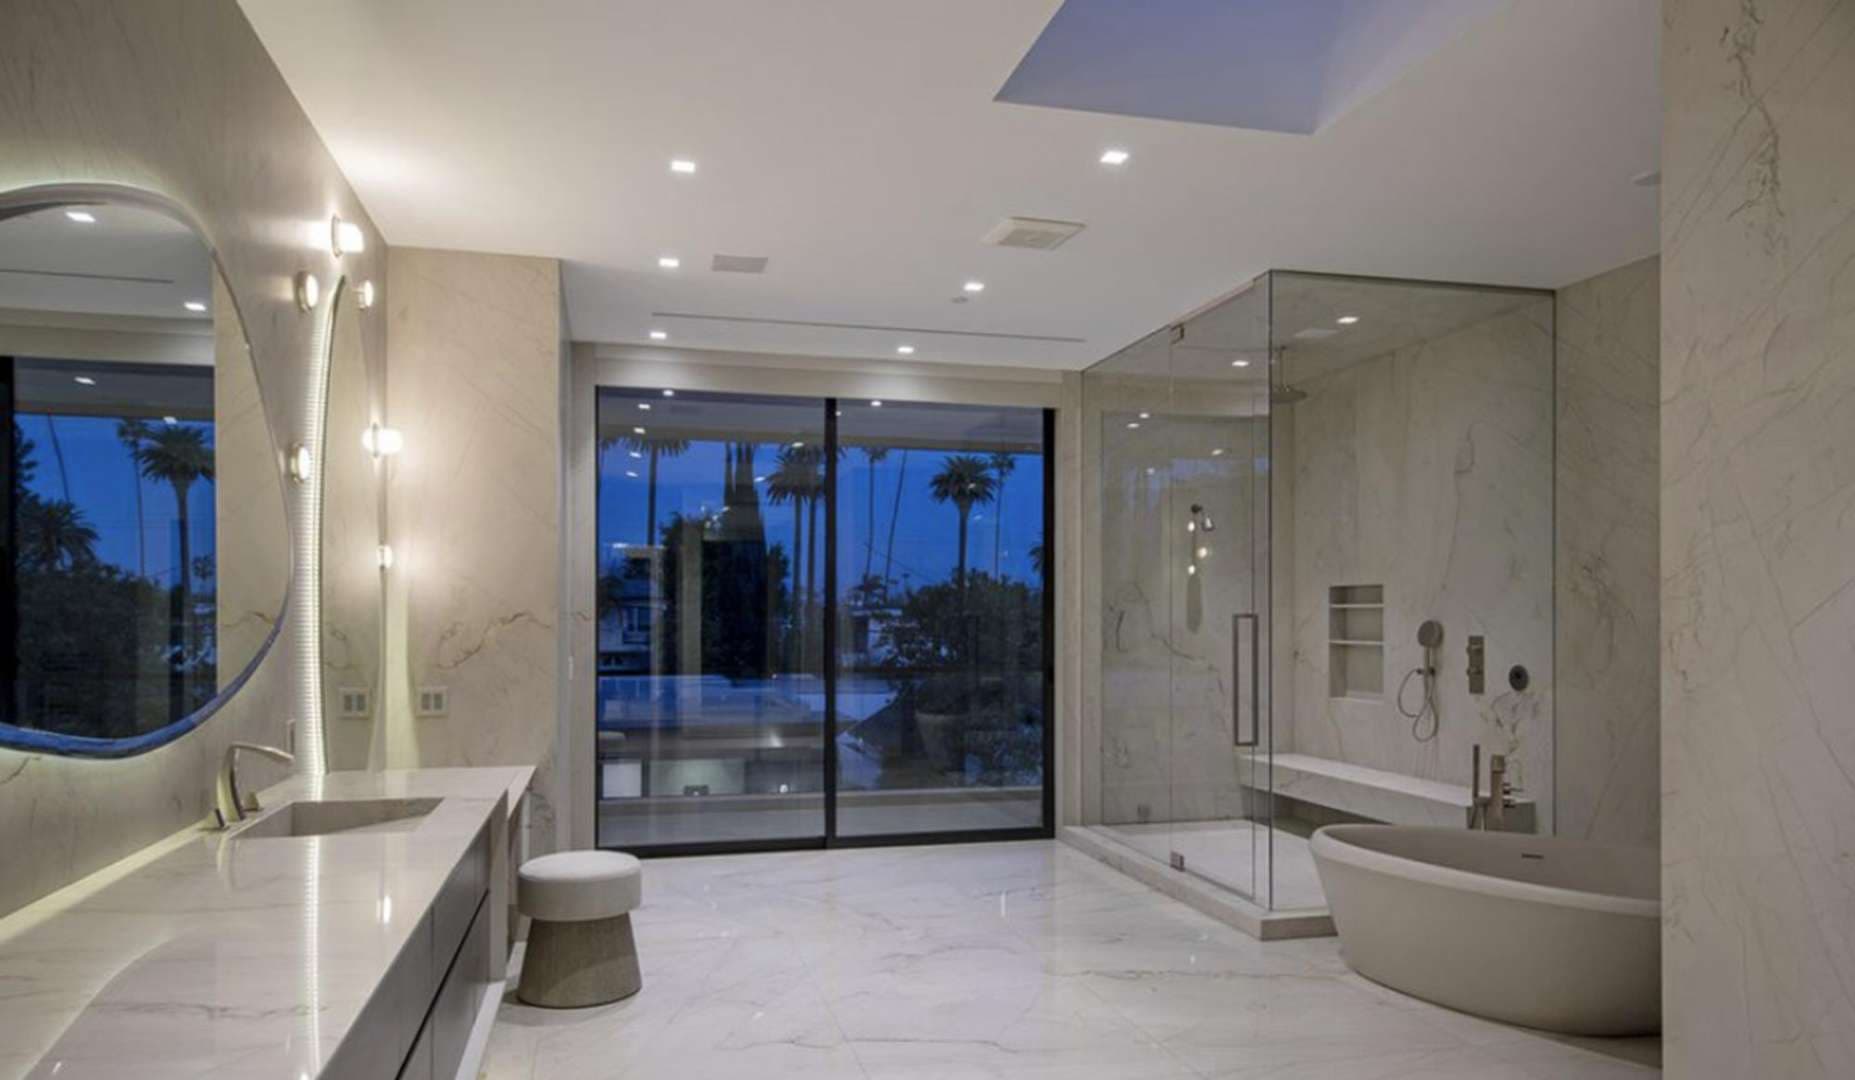 8 Bedroom Villa For Sale Beverly Hills Lp05358 2f14a66eb141a200.jpg